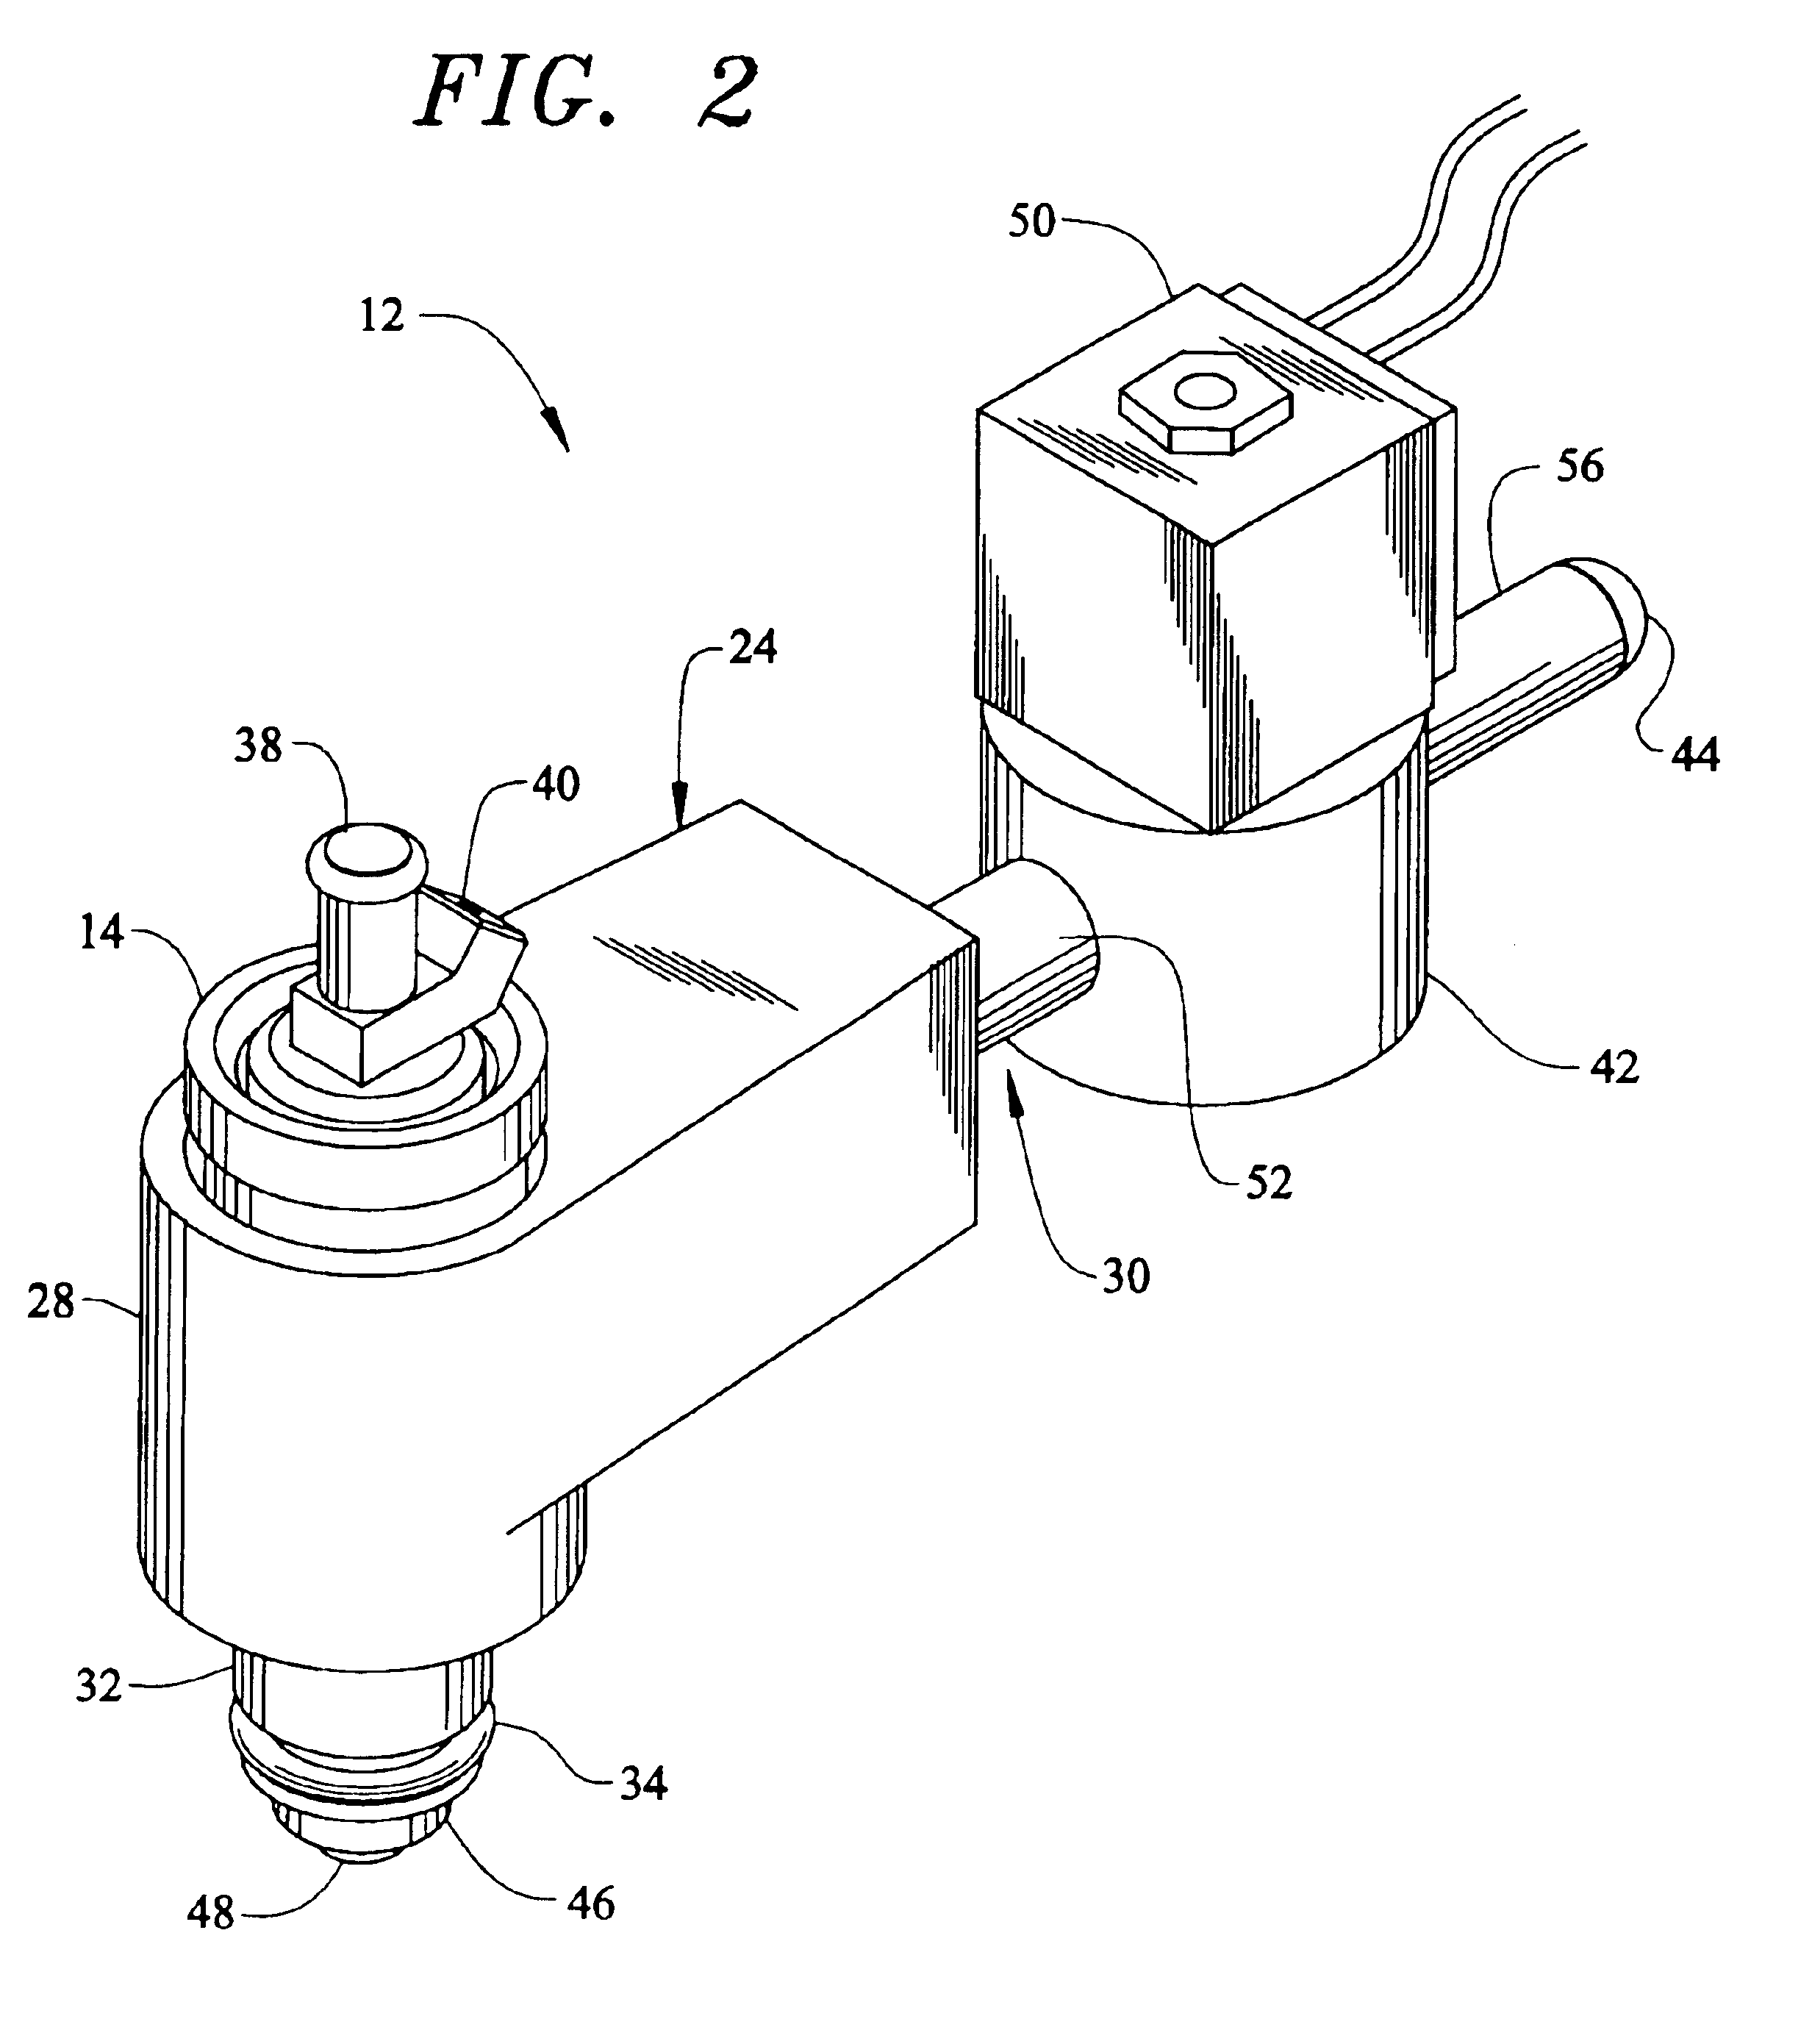 Hydrogen and liquid fuel injection system